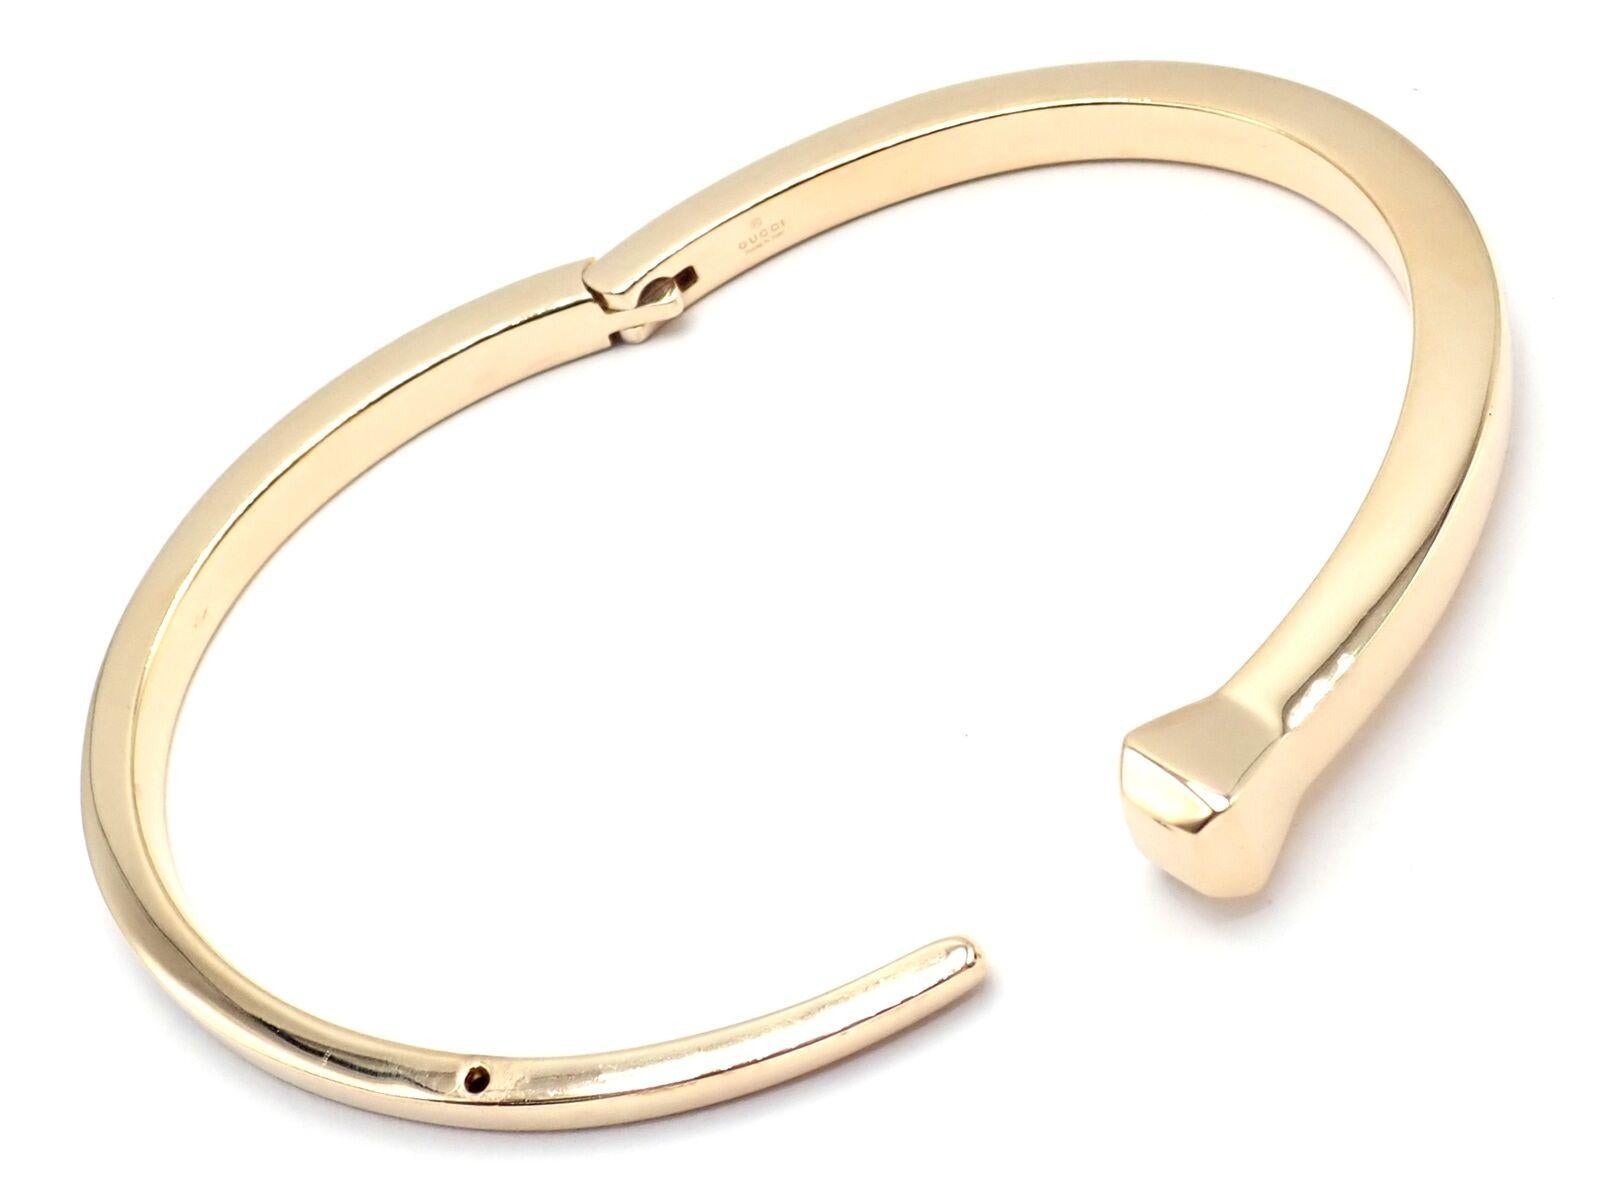 Gucci Chiodo Nail Yellow Gold Bangle Bracelet In New Condition For Sale In Holland, PA